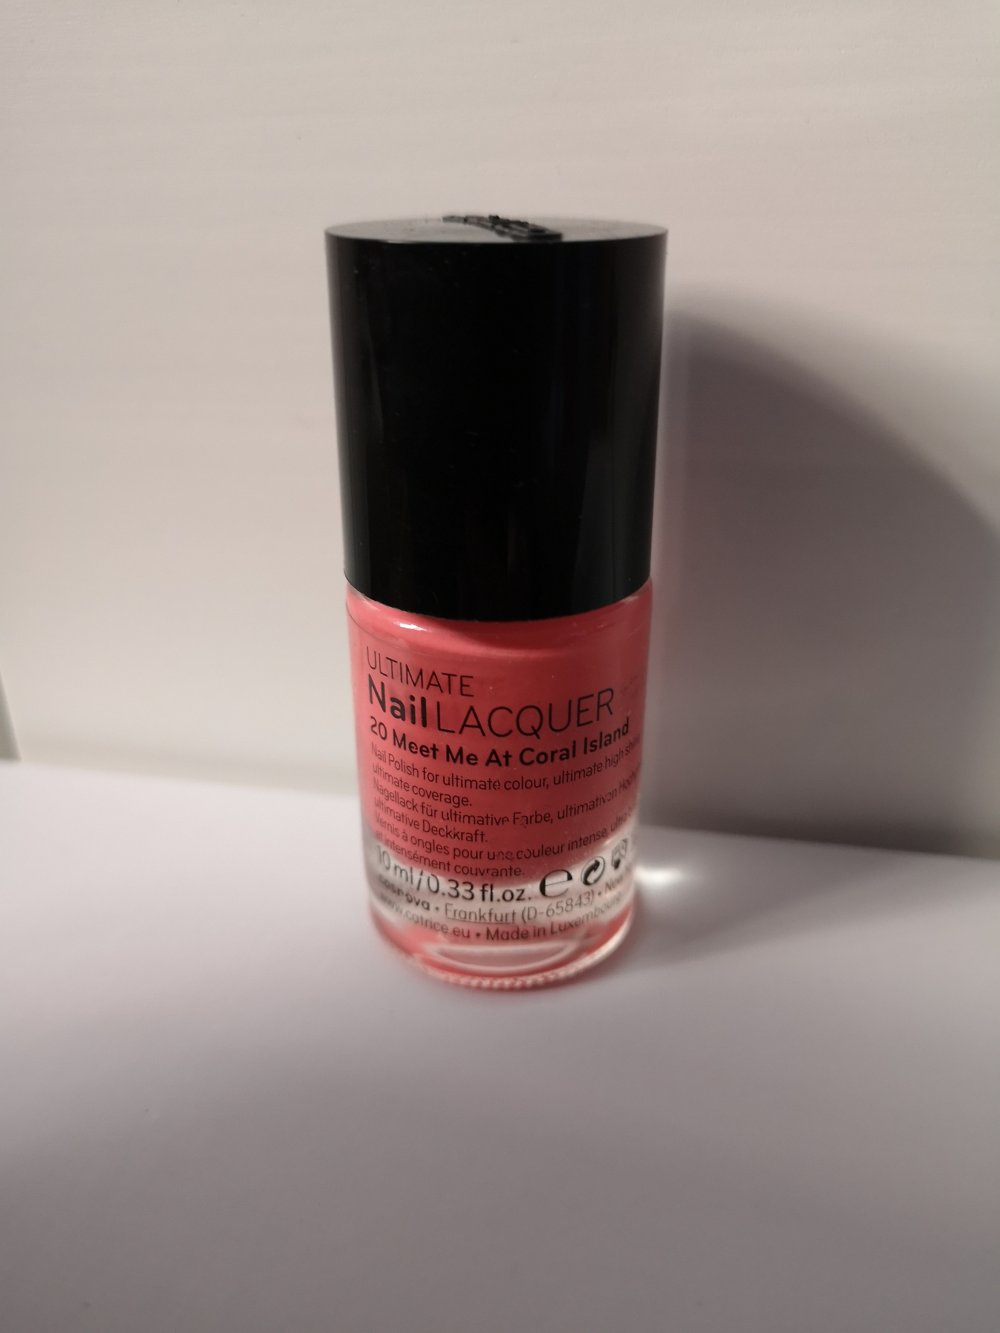 Catrice Cosmetics 20 Meet Me at Coral Island Ultimate Nail Lacquer